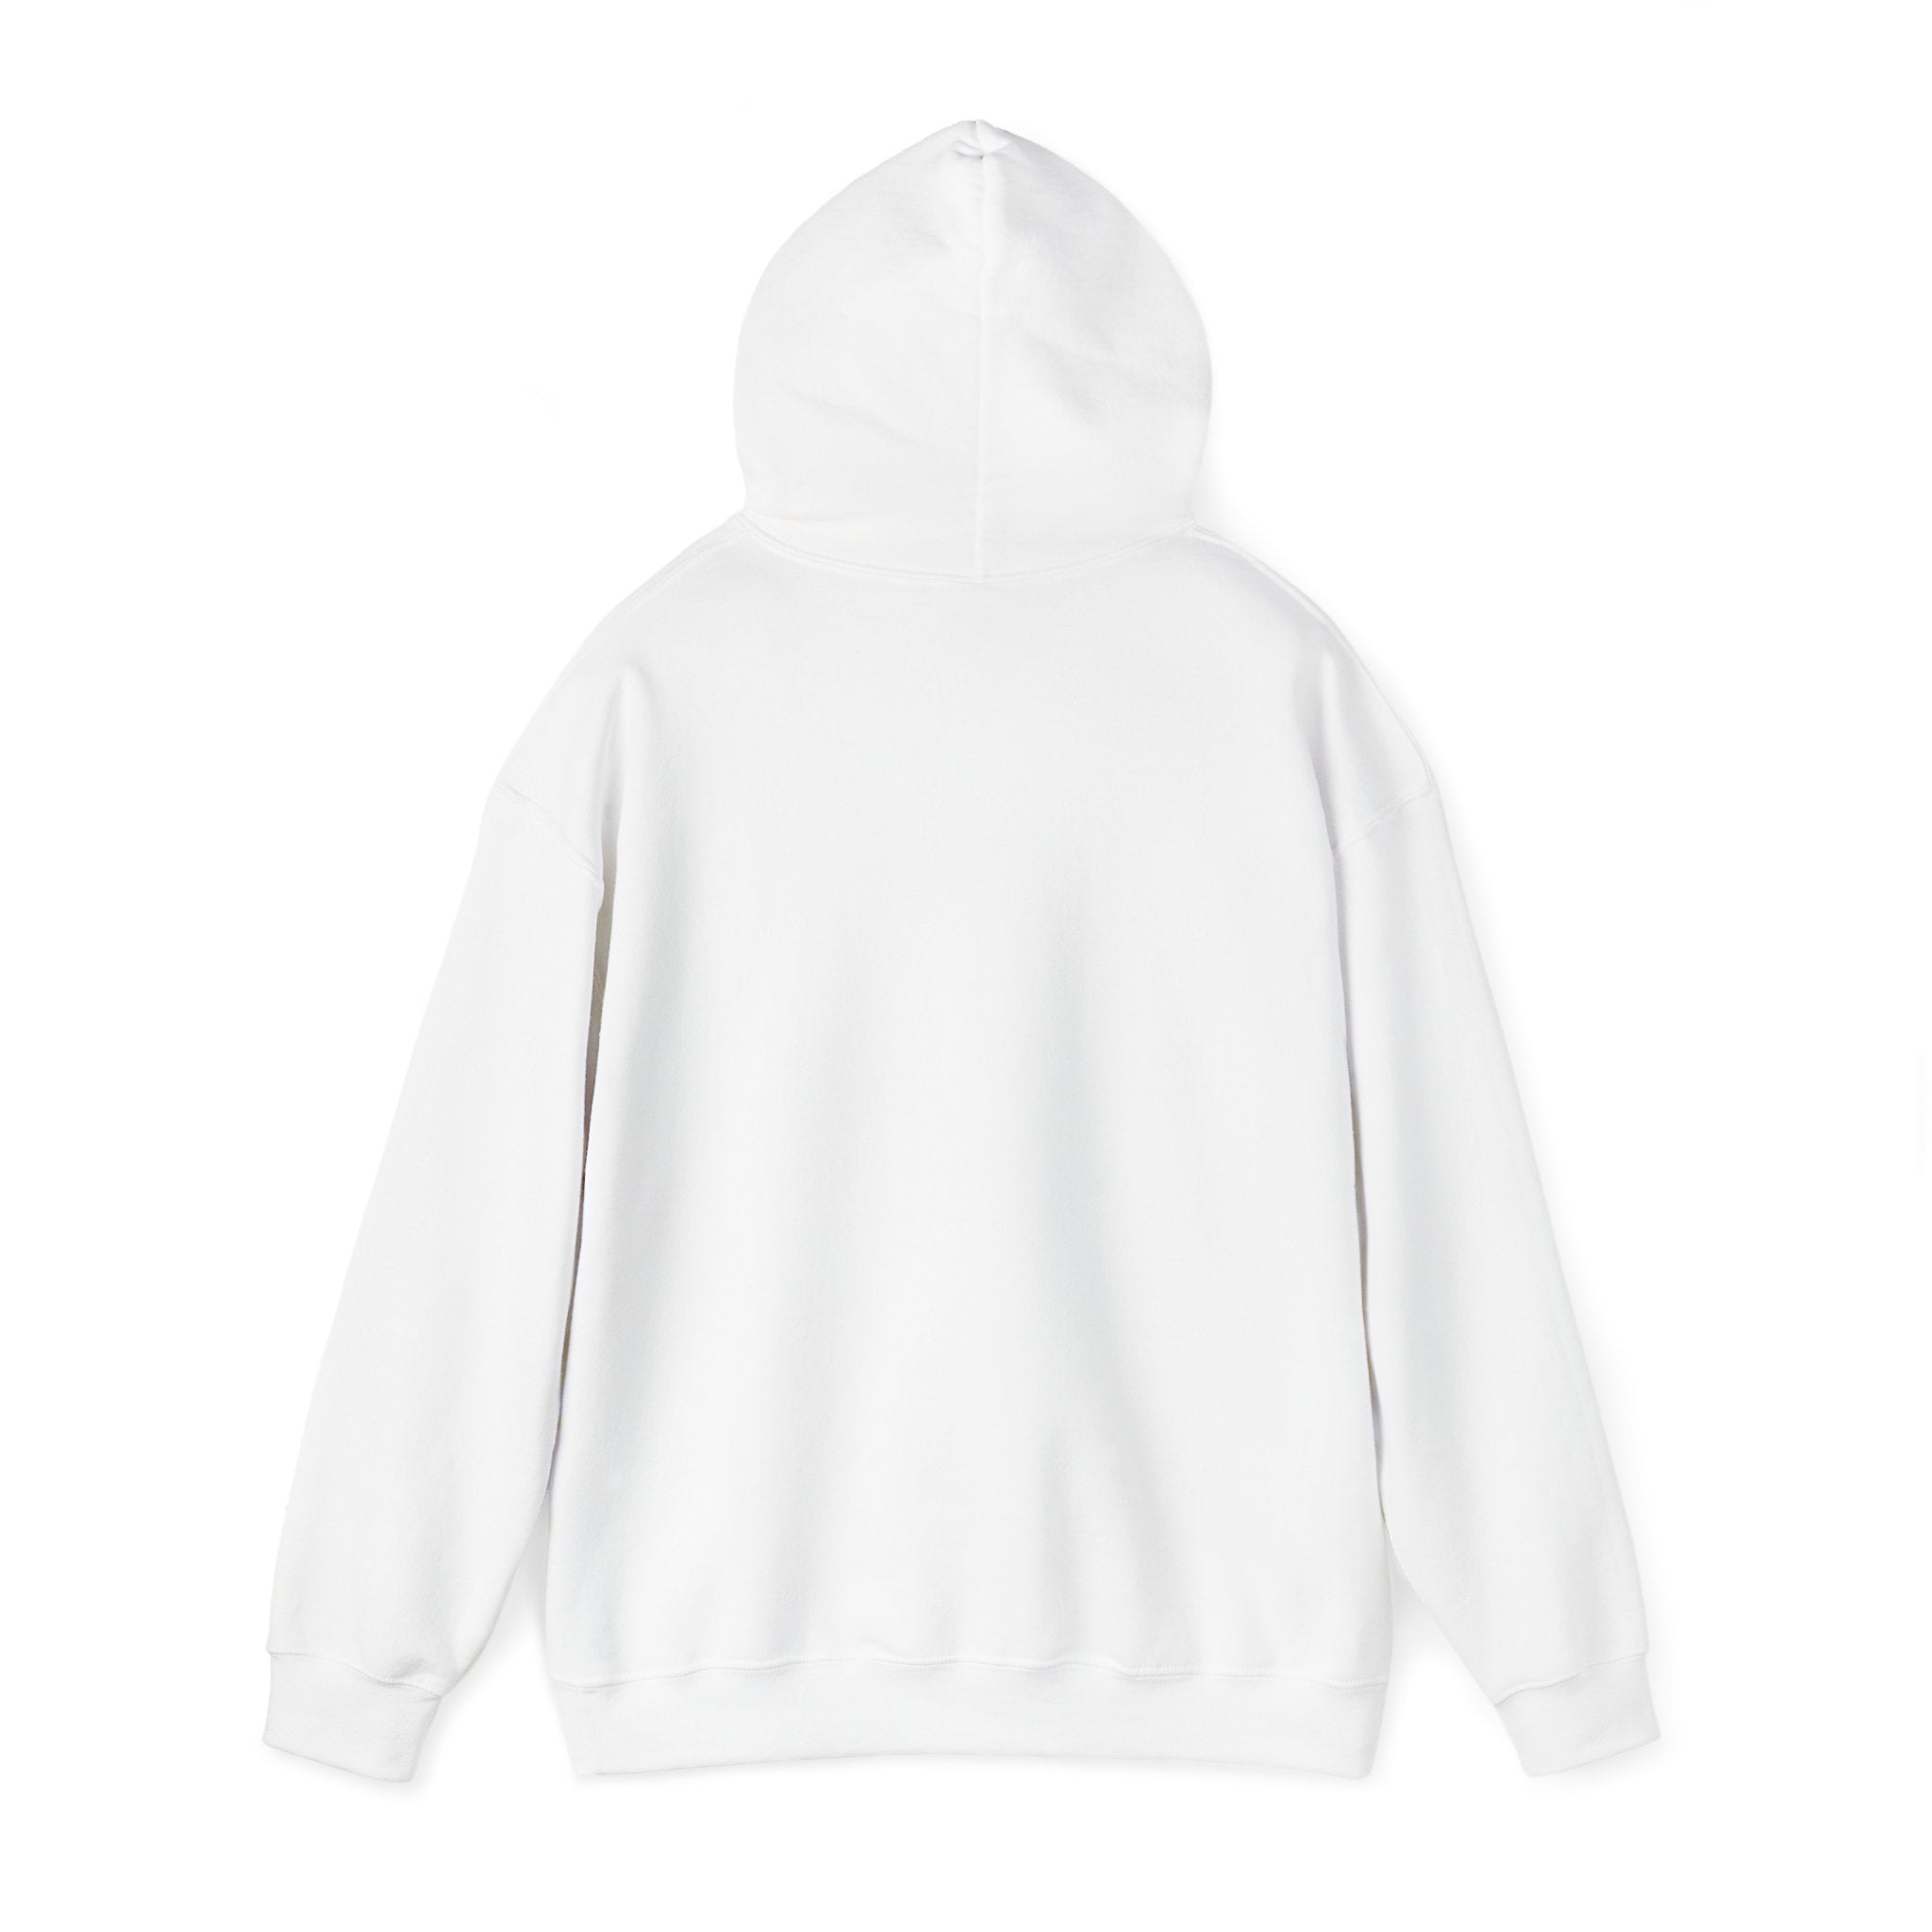 A classic fit, plain white "I am Older Than the Internet" hooded sweatshirt shown from the back.